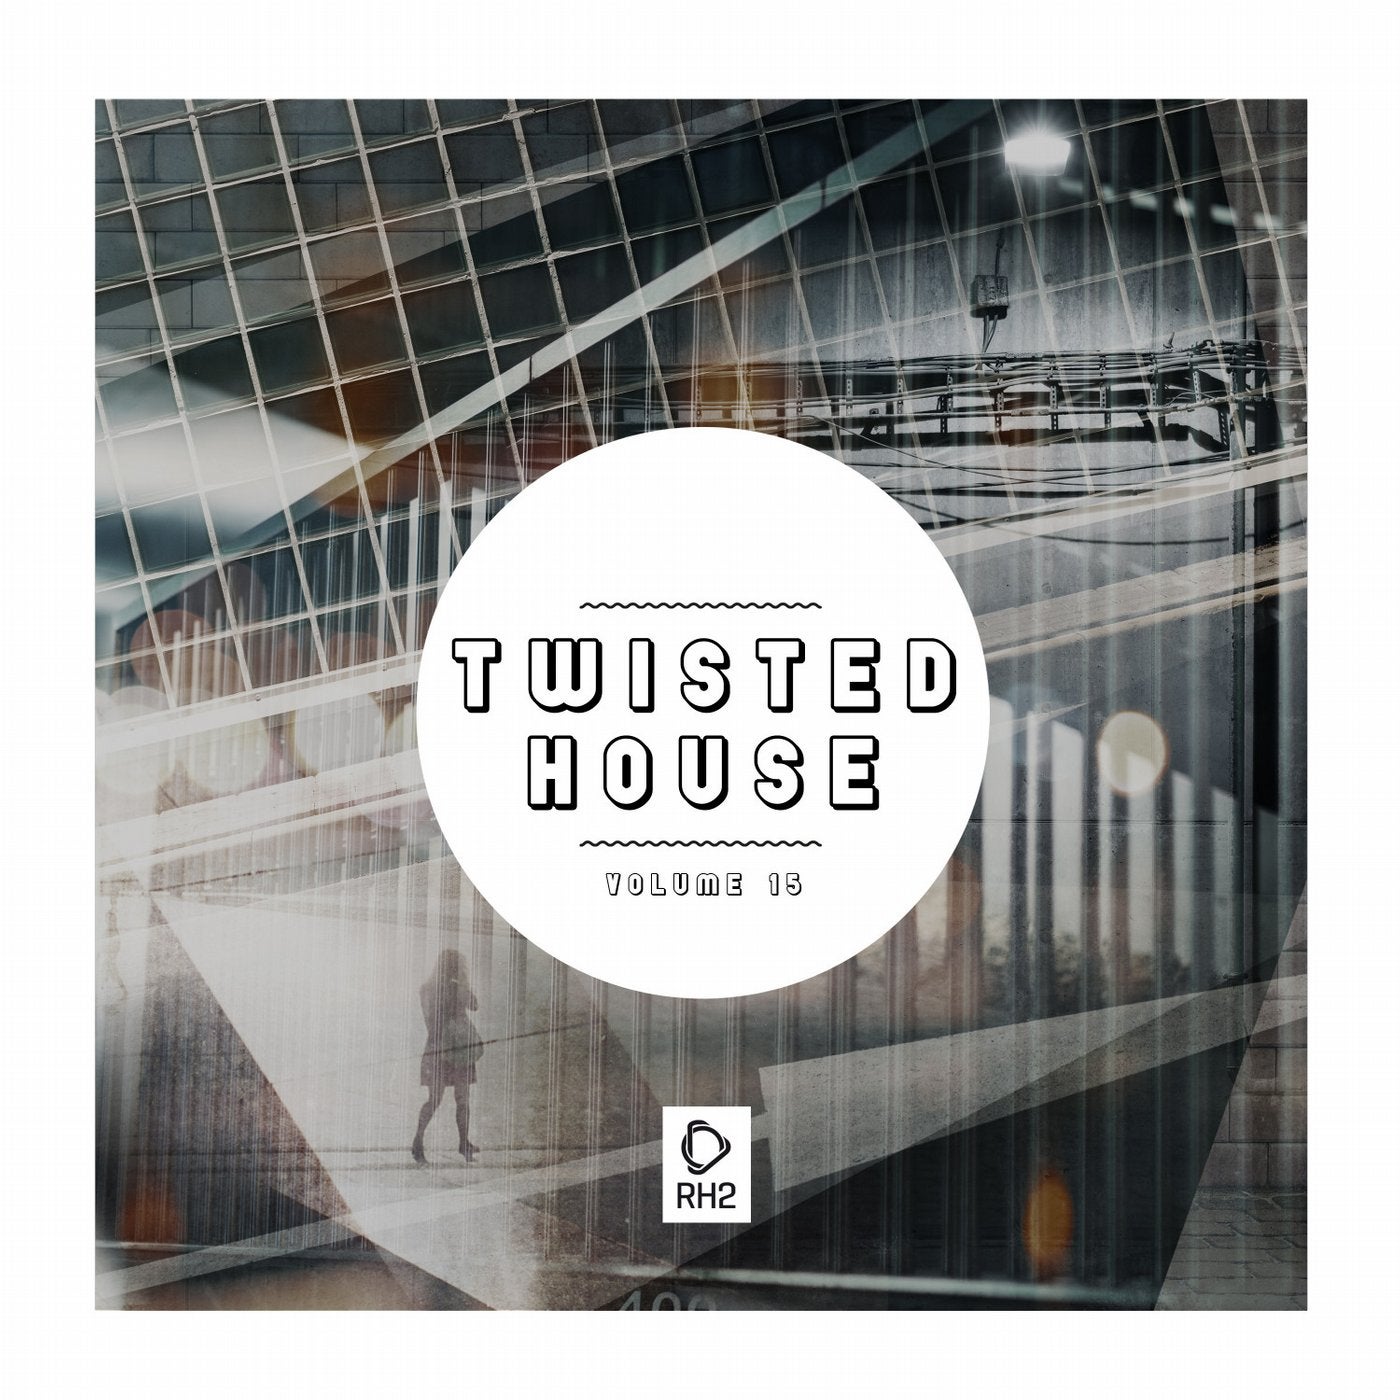 Twisted House Vol. 15